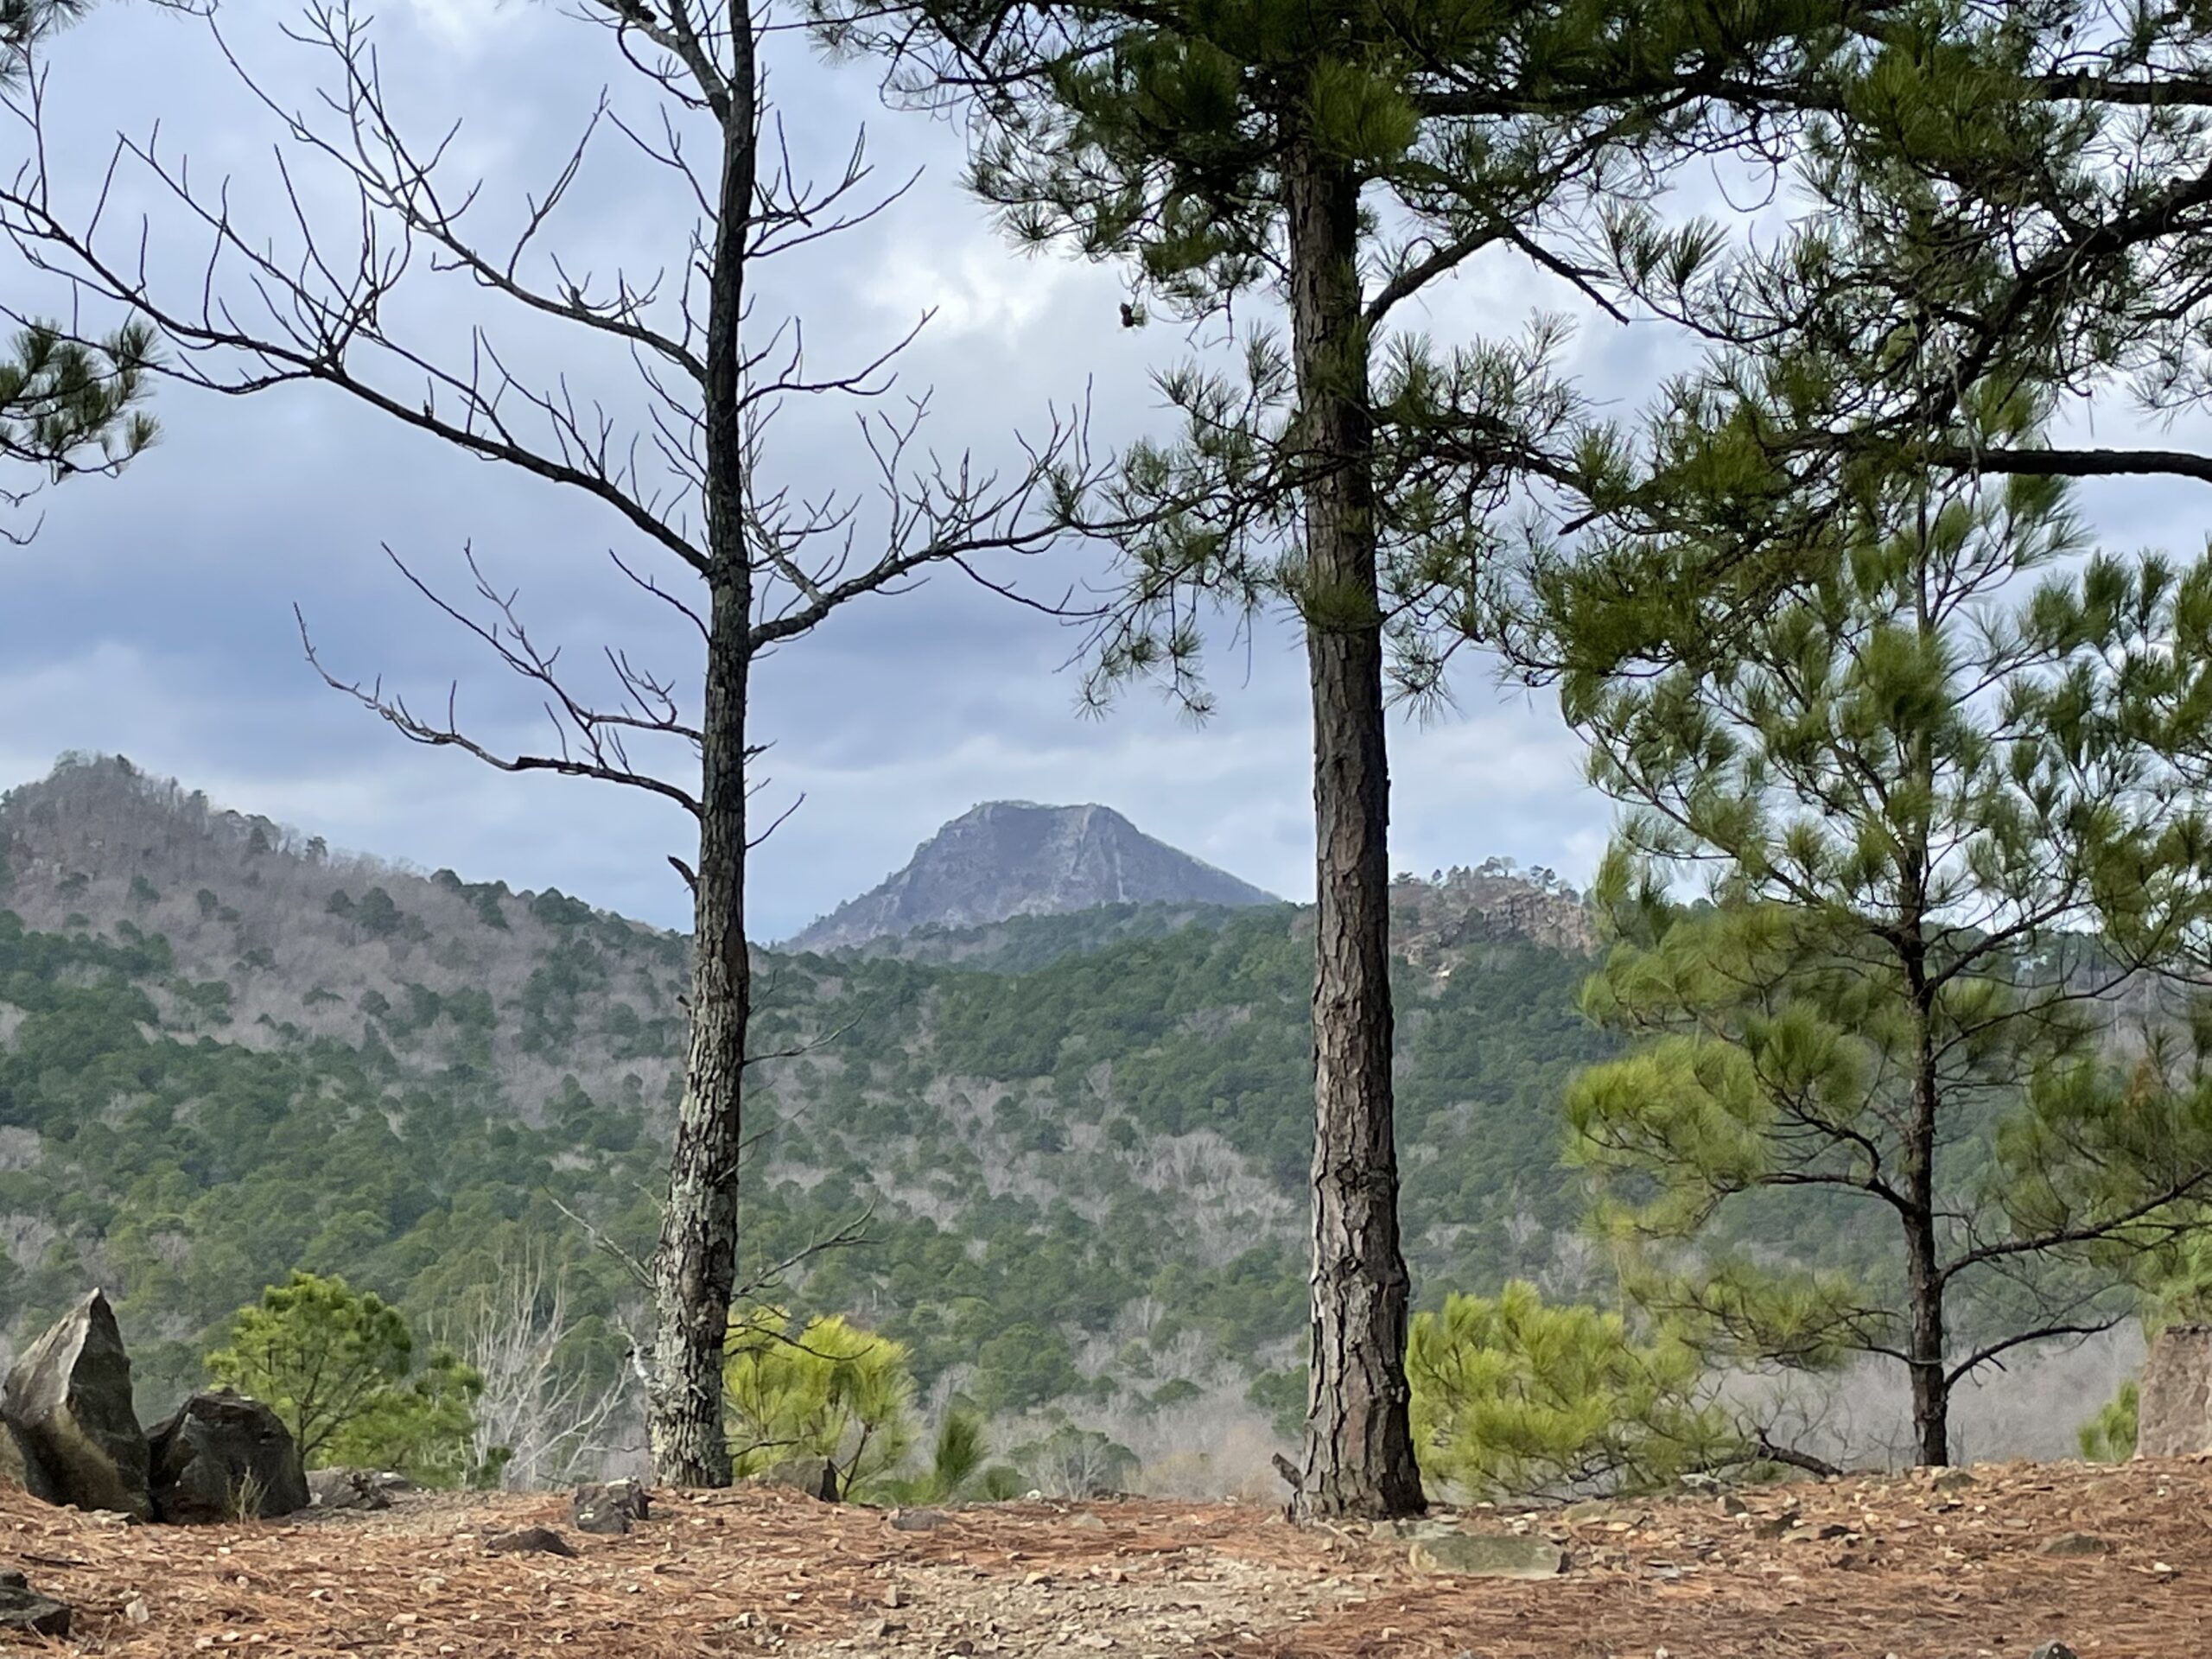 Looking toward a mountain ridge with a larger mountain framed by the two trees.